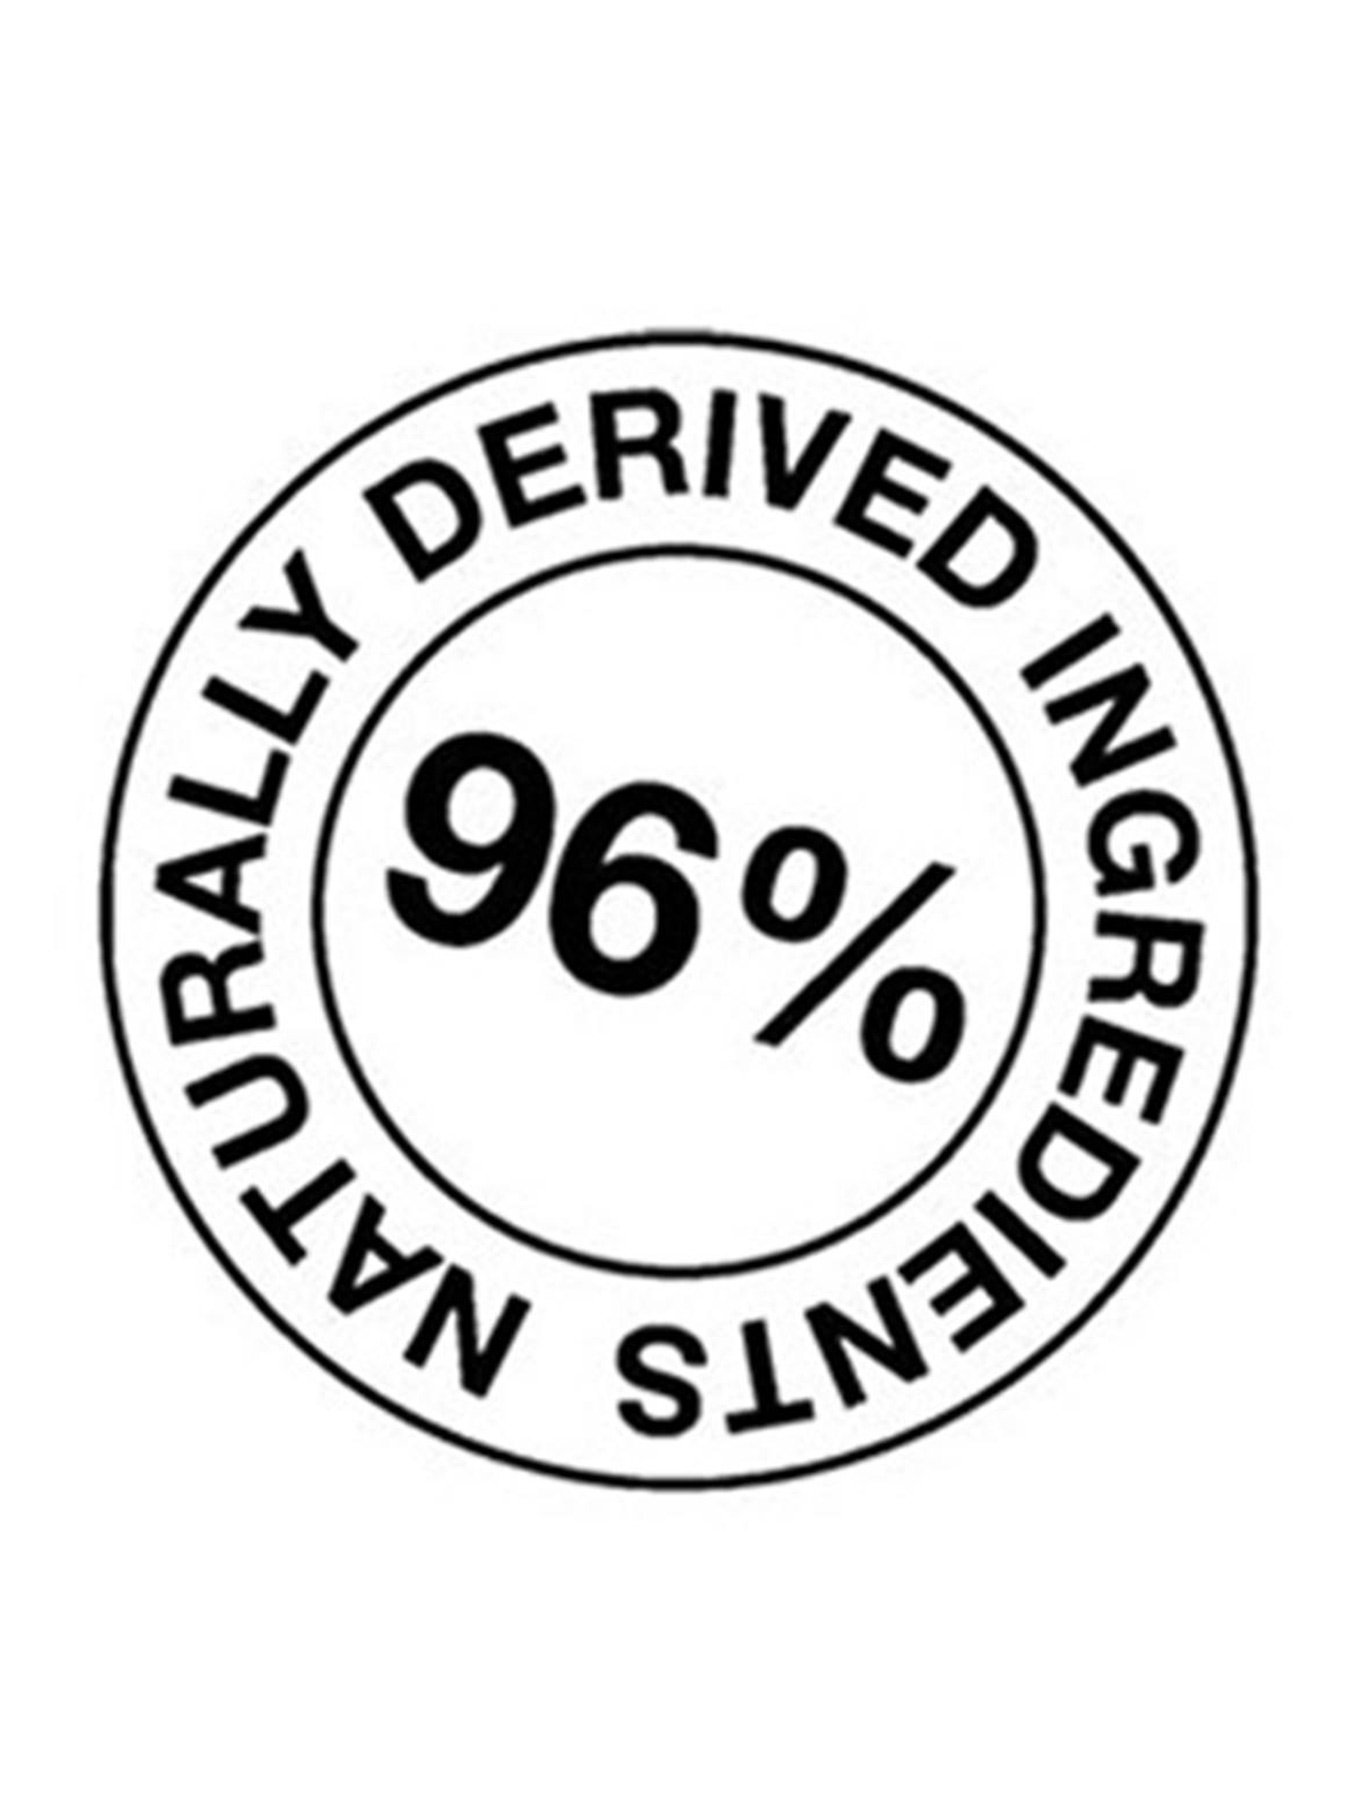 96% Naturally Derived Ingredients badge.